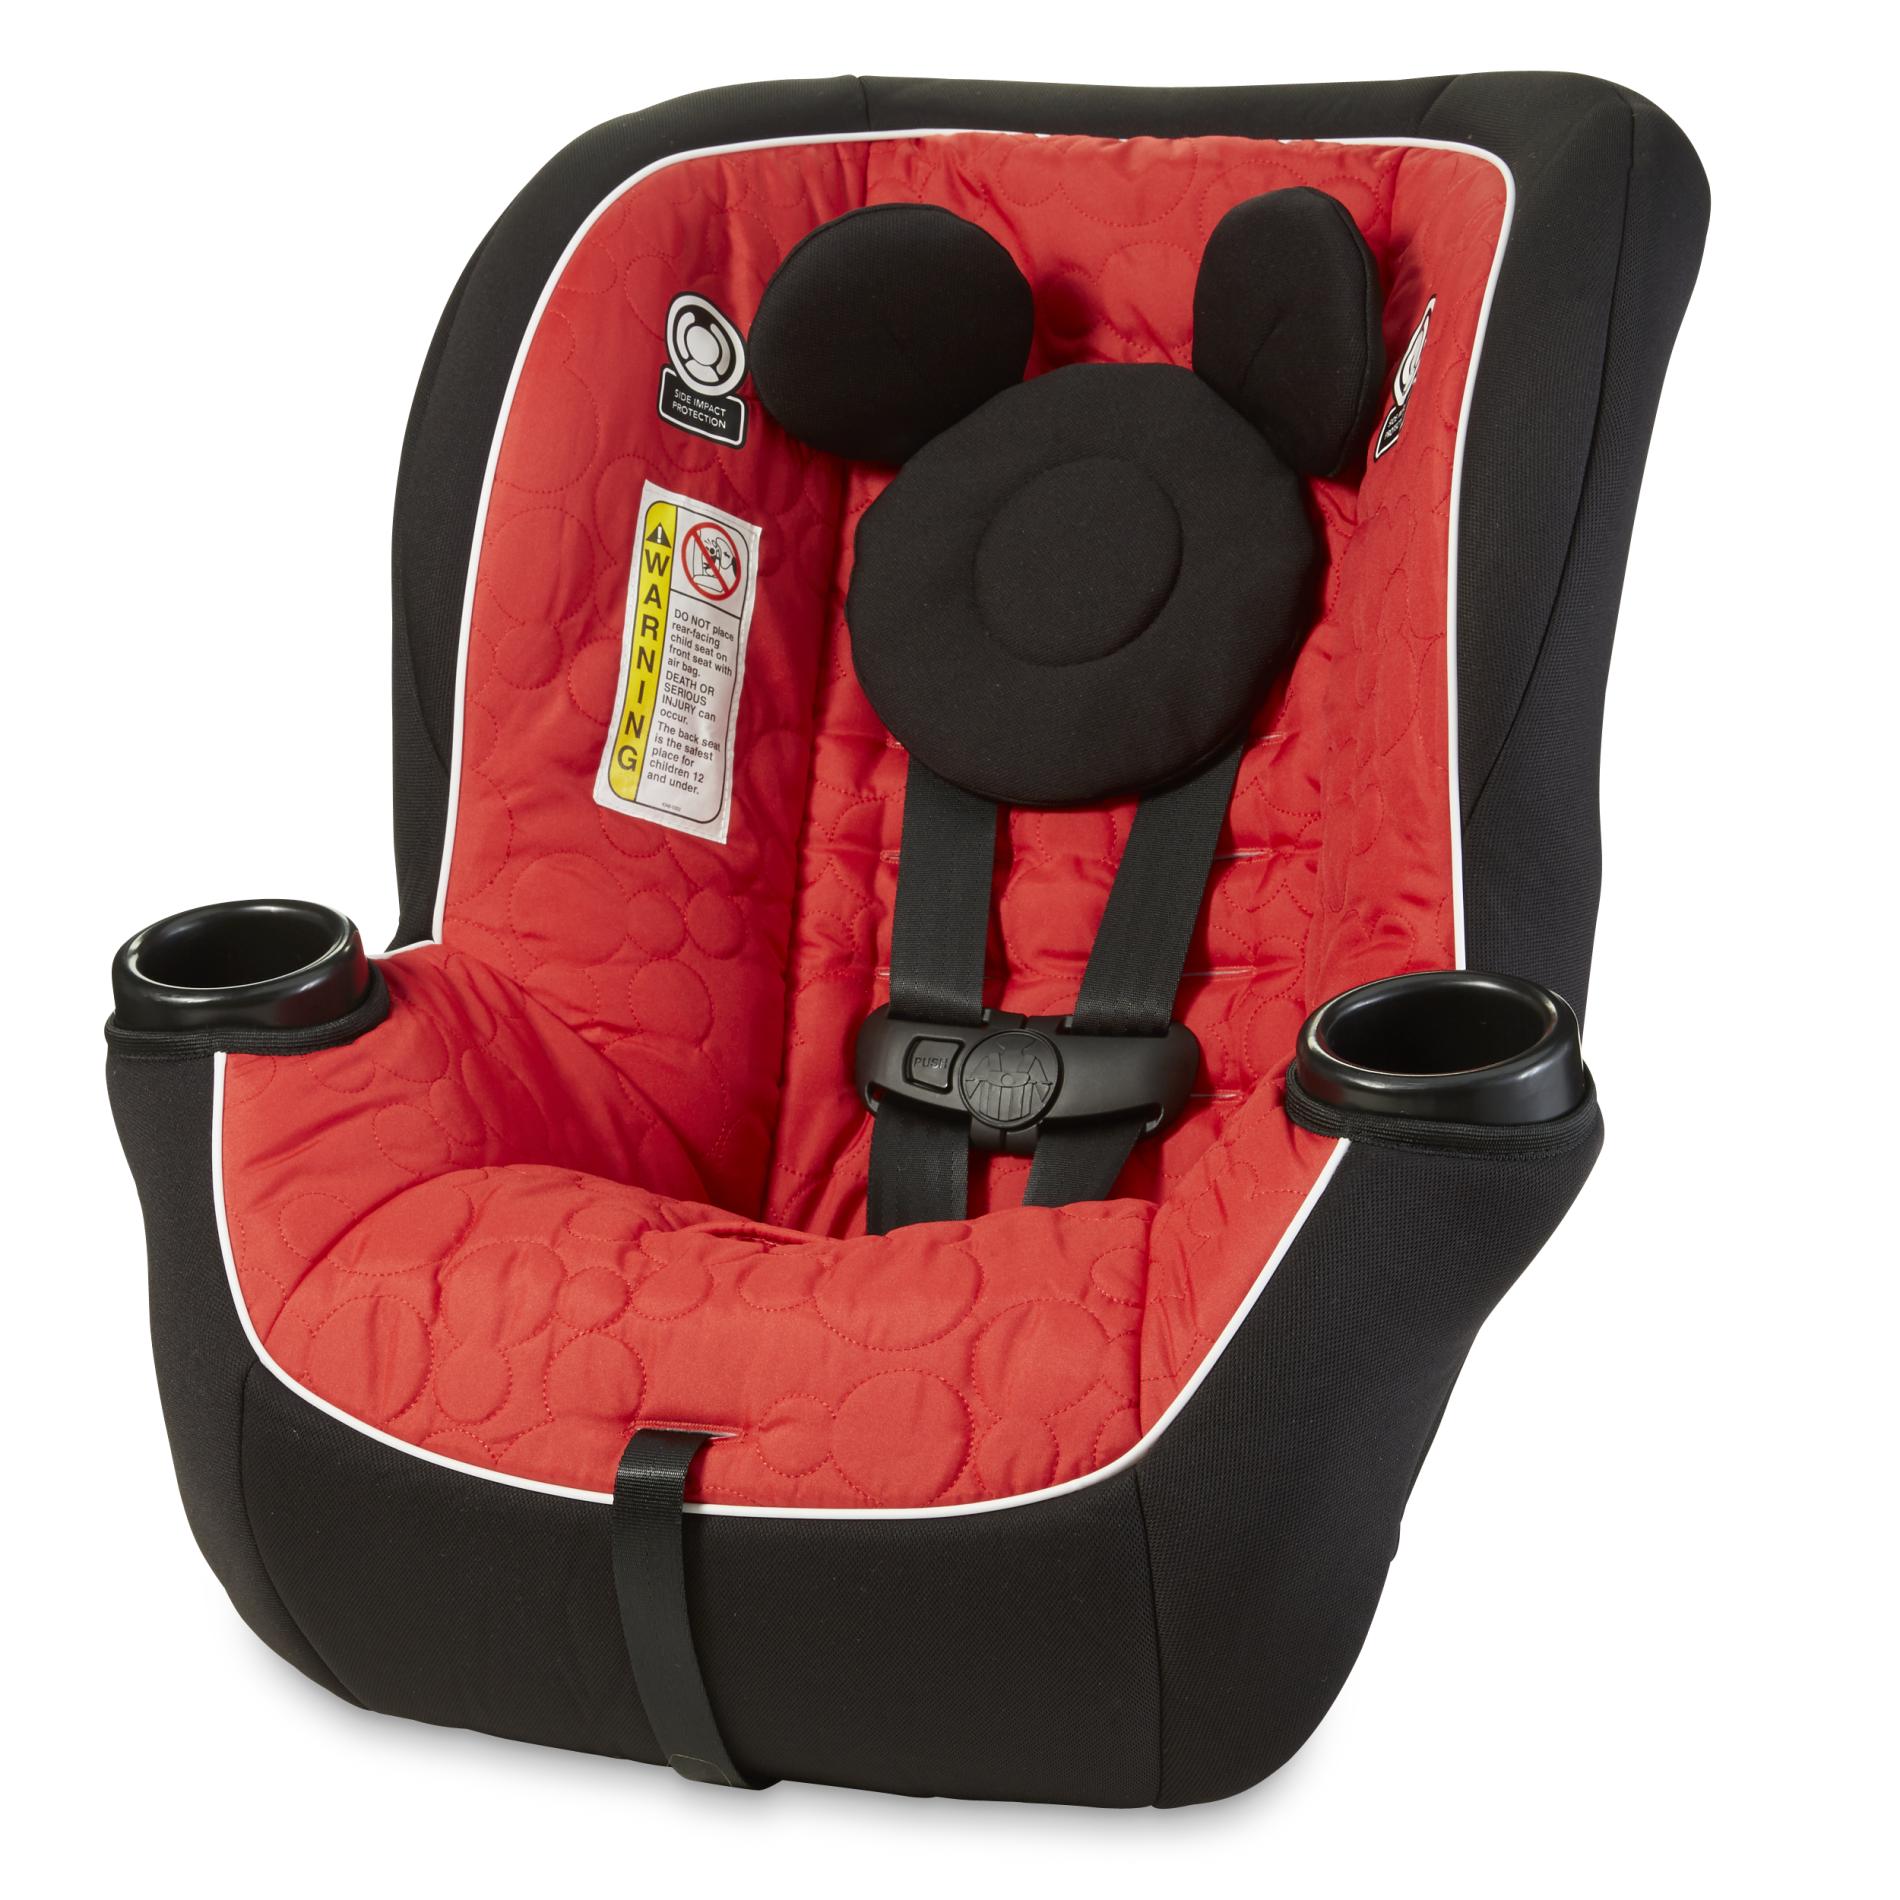 Disney Baby Apt 50 Convertible Car Seat - Mickey Mouse